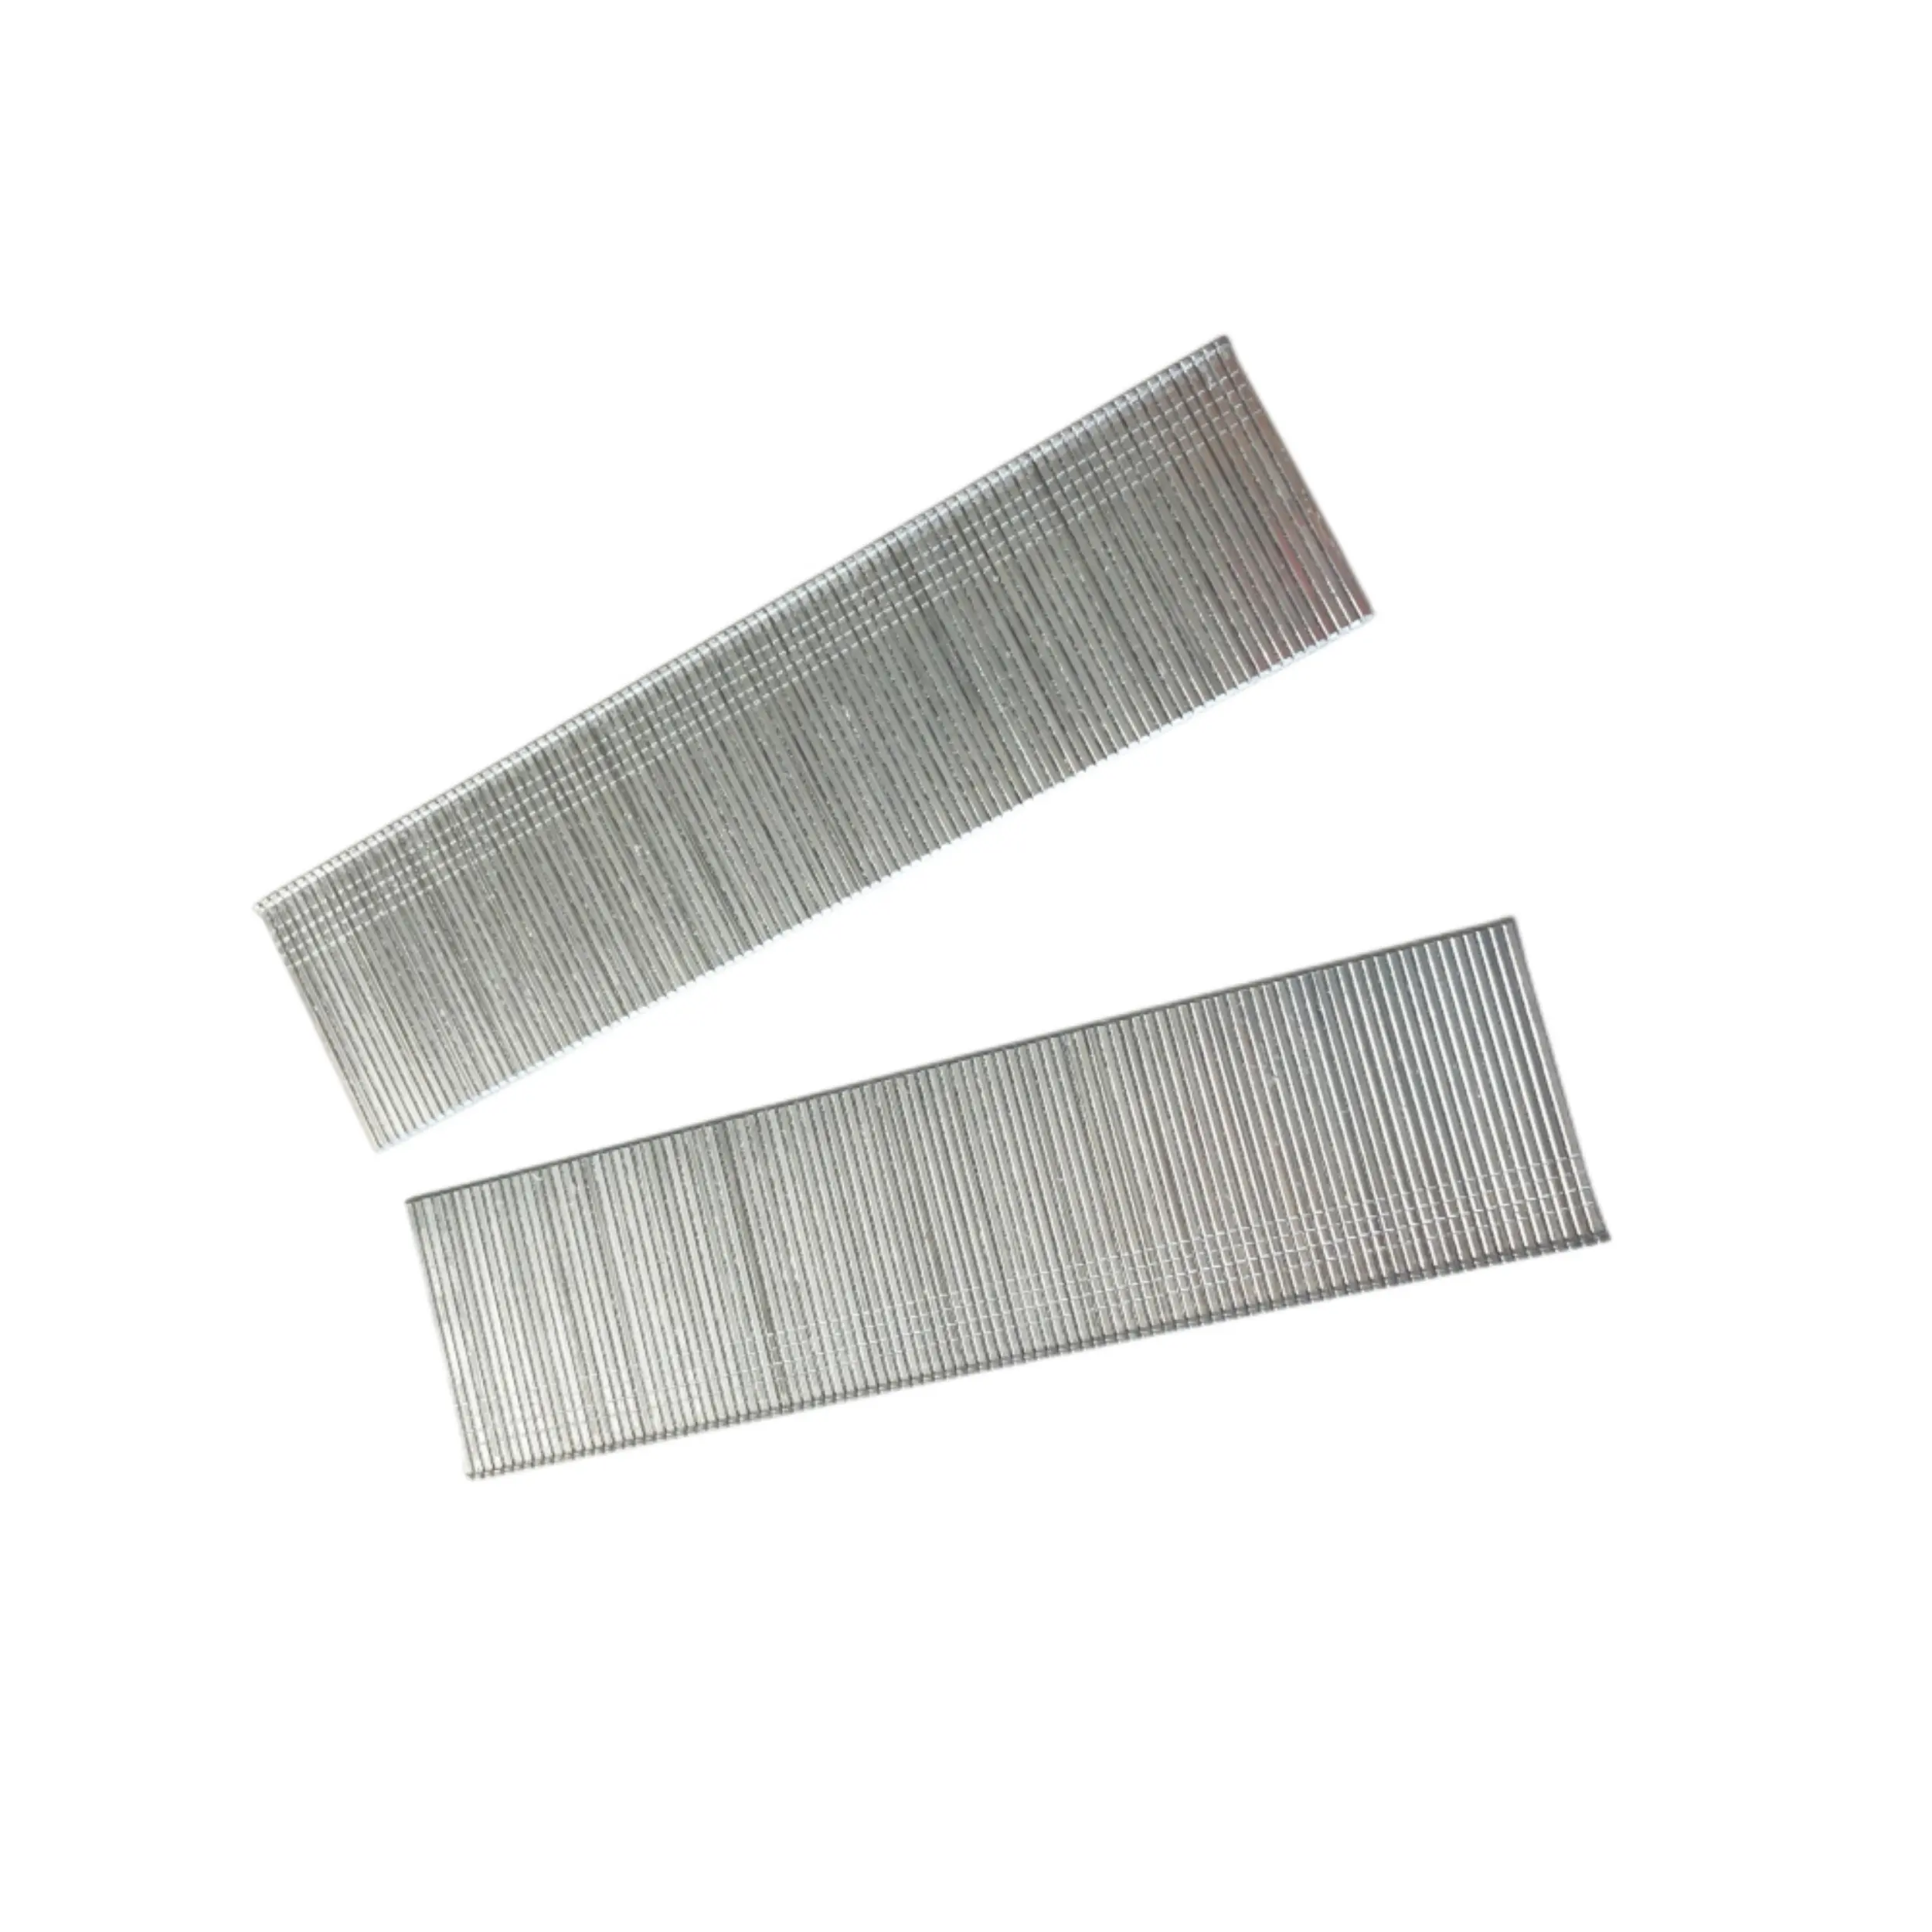 China Manufacturer Concrete Steel, Carbon Steel F Type Customized Sizes F30/F15/F40 Row Of Nails Staples